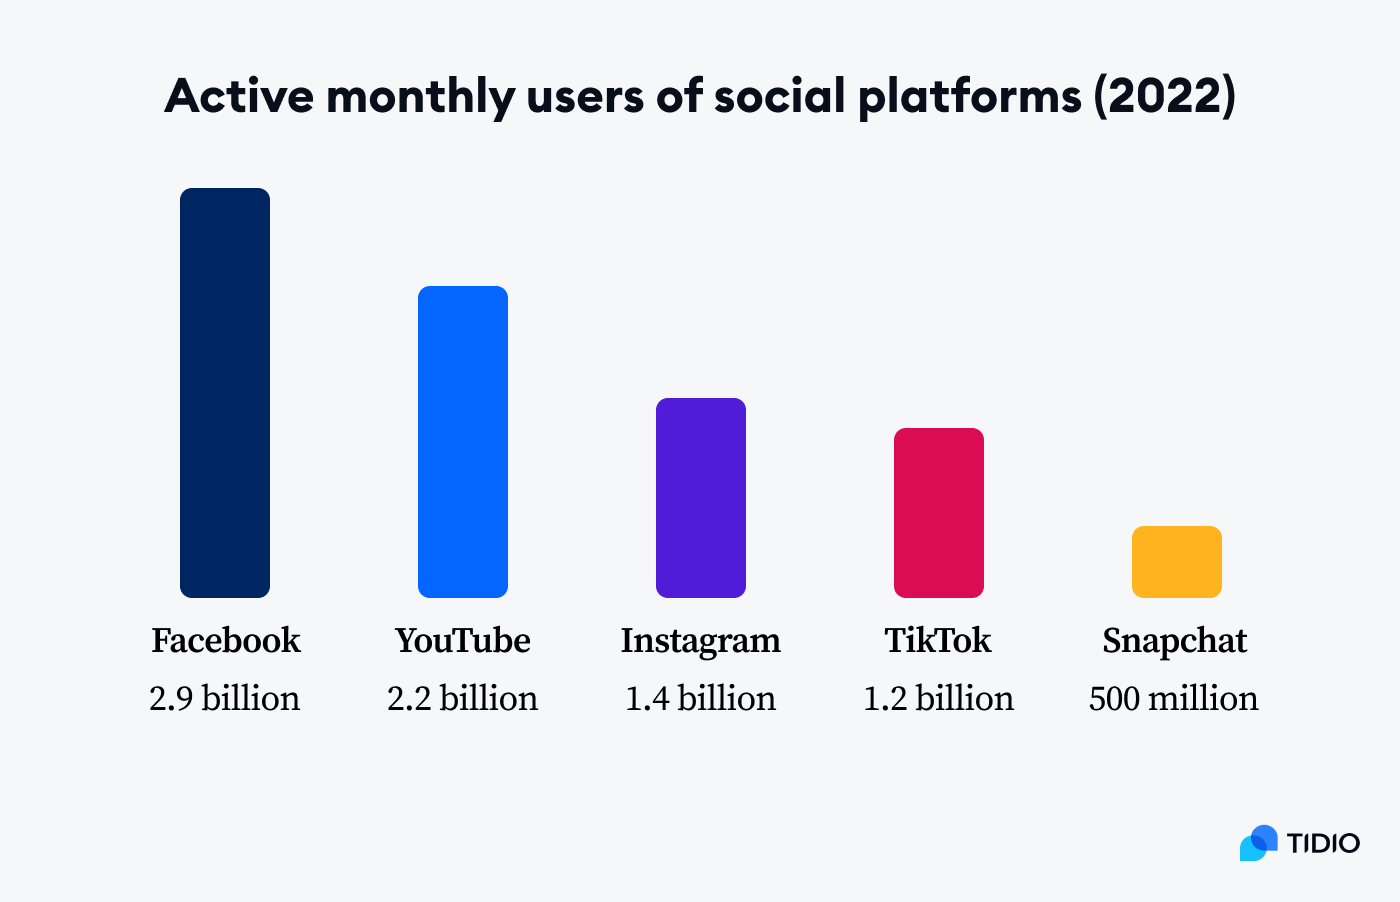 Statistics showing monthly active users of social platforms: Facebook, YouTube, Instagram, TikTok and Snapchat.